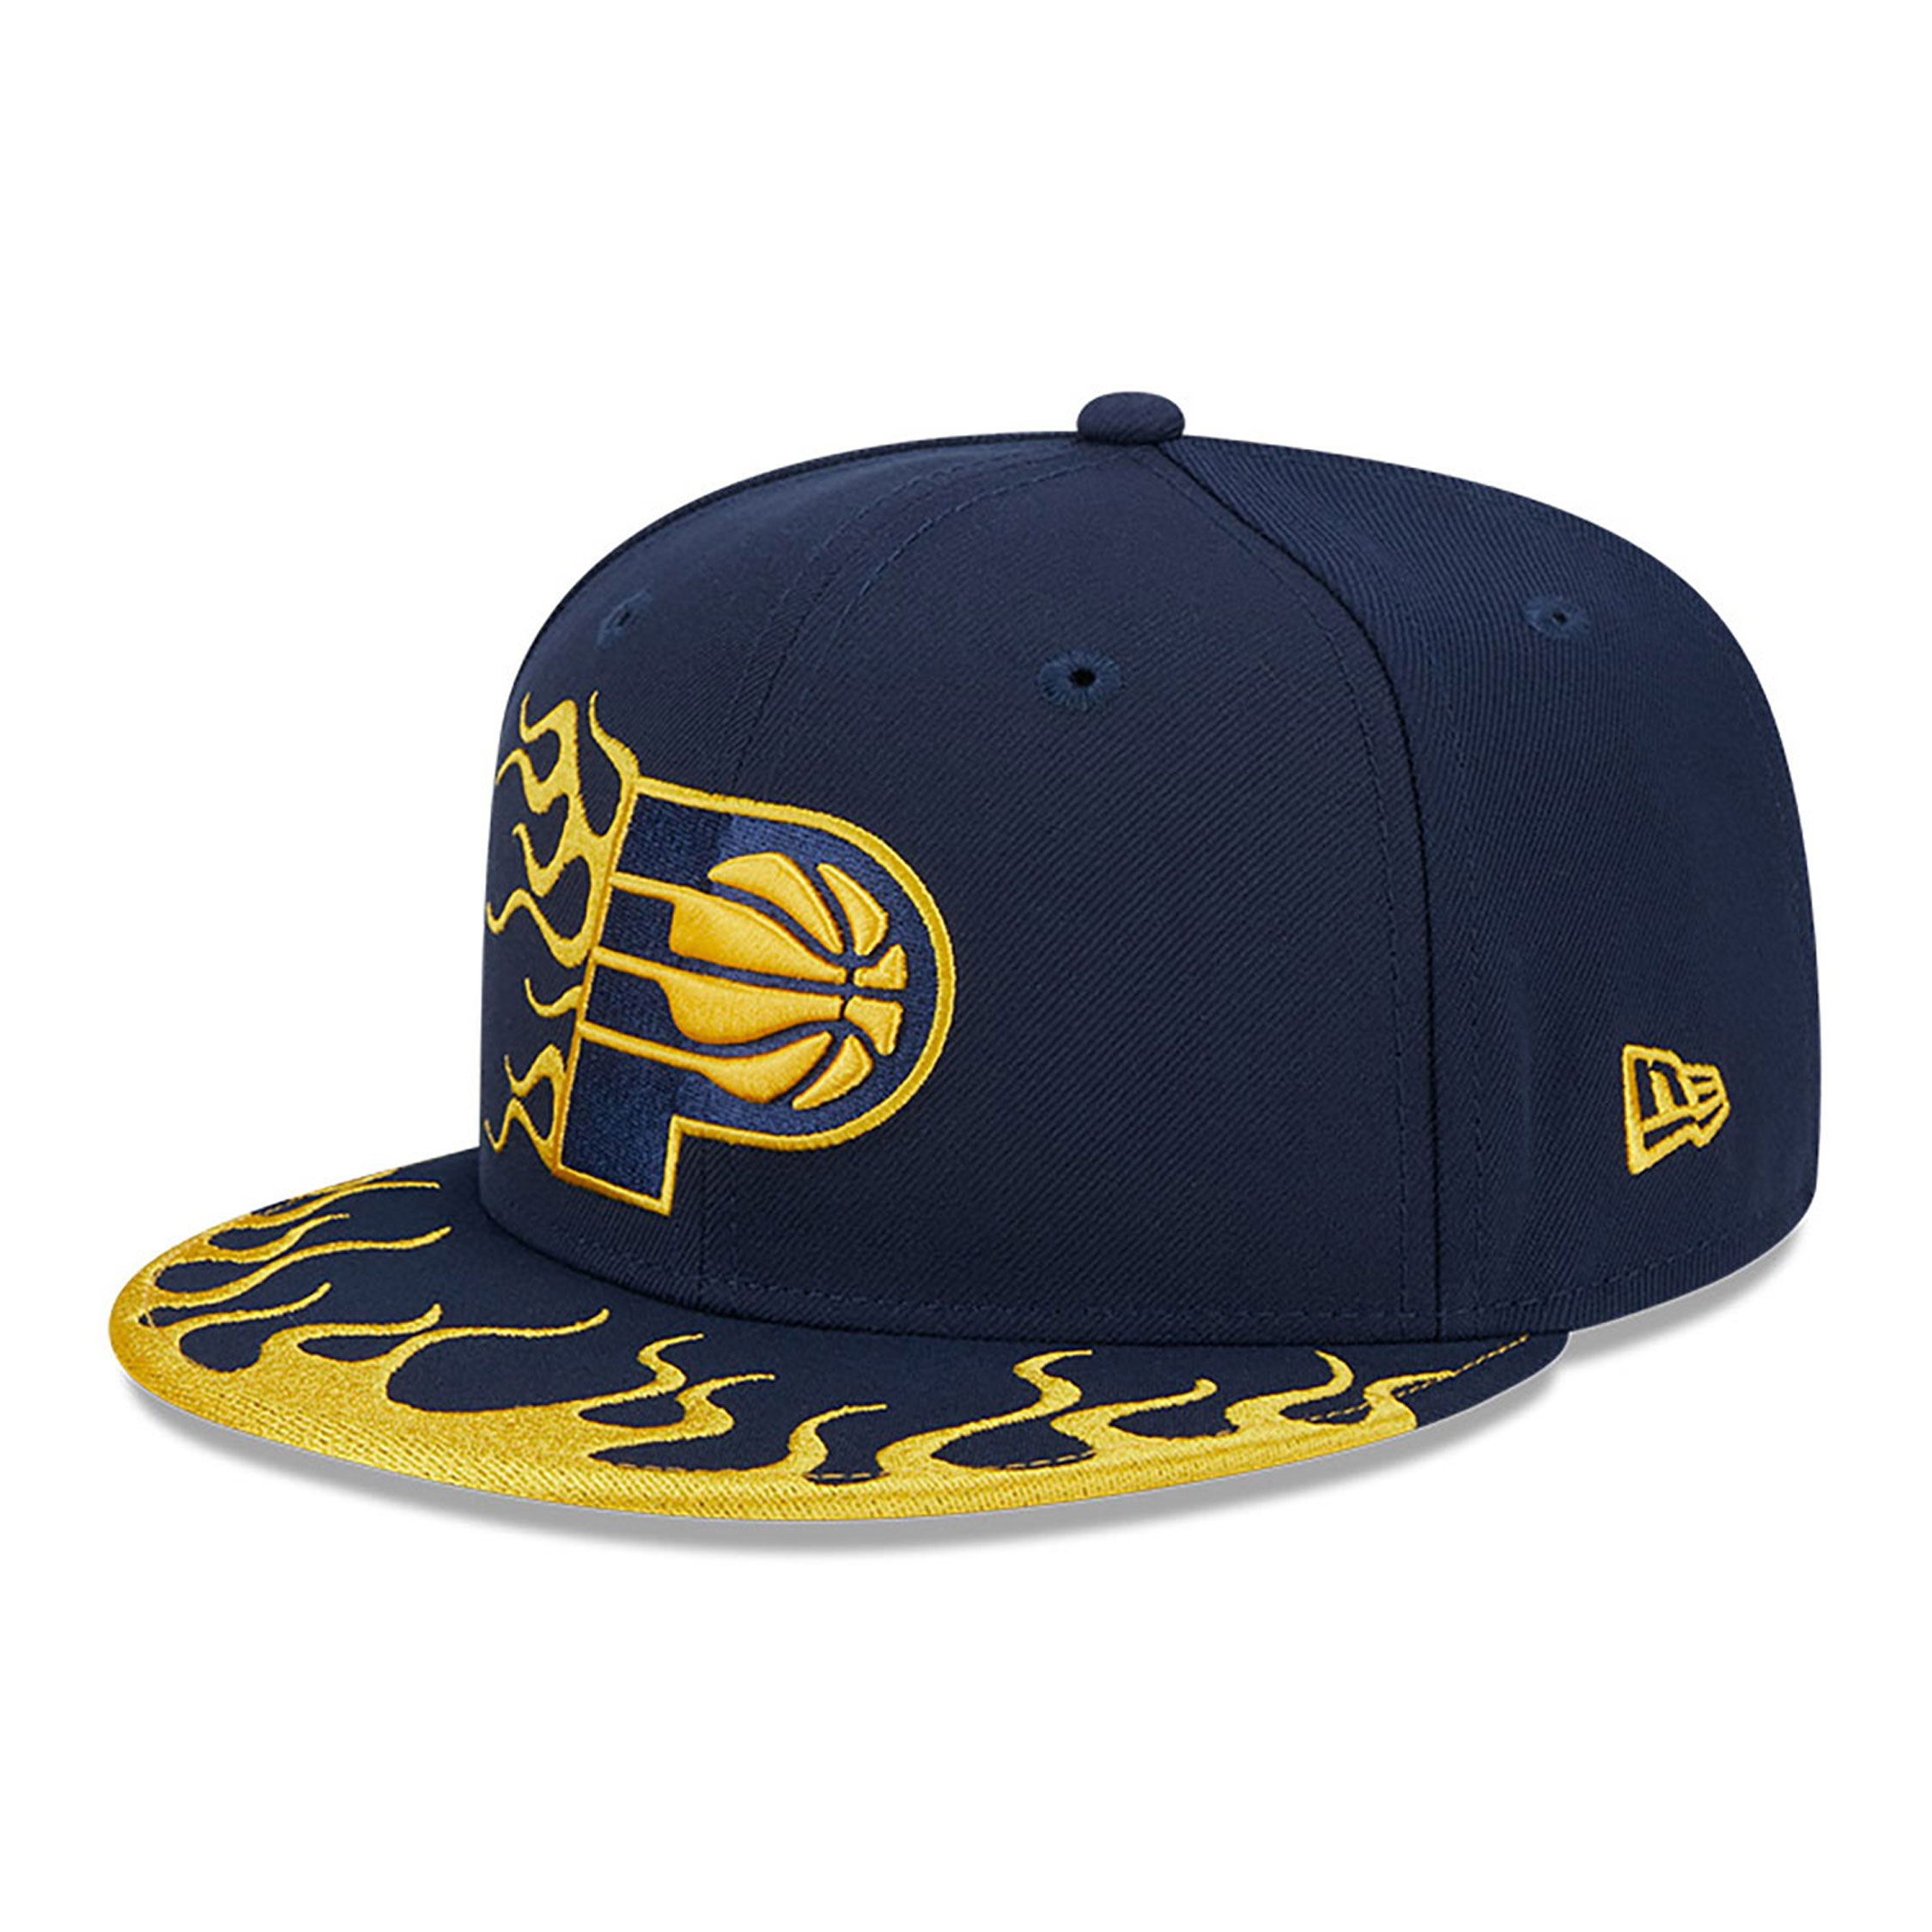 Casquette 9FIFTY Snapback Indiana Pacers NBA Rally Drive | New Era Cap FR